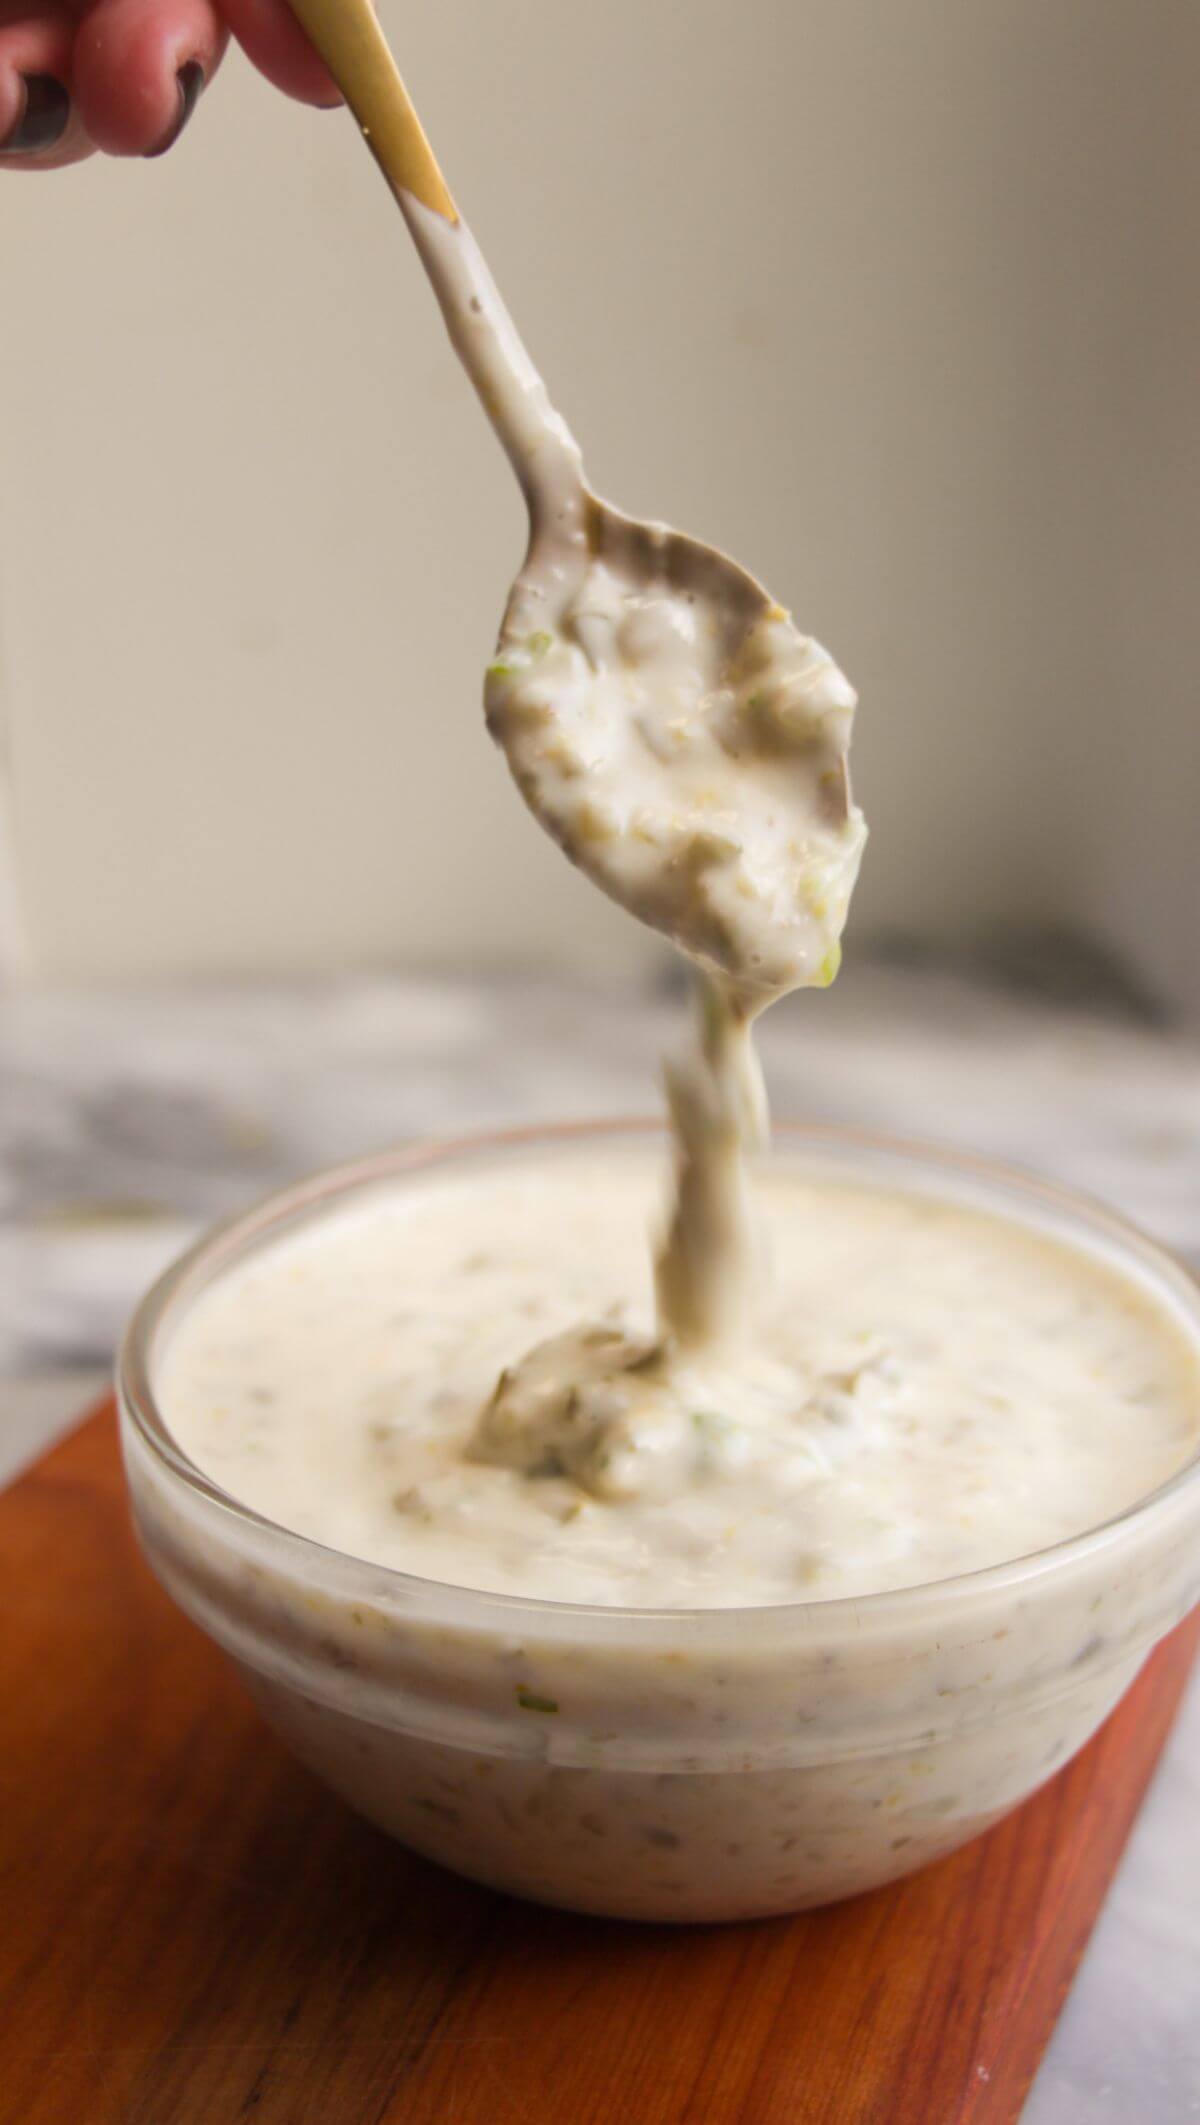 Tartare sauce dripping off a small spoon into a glass bowl.